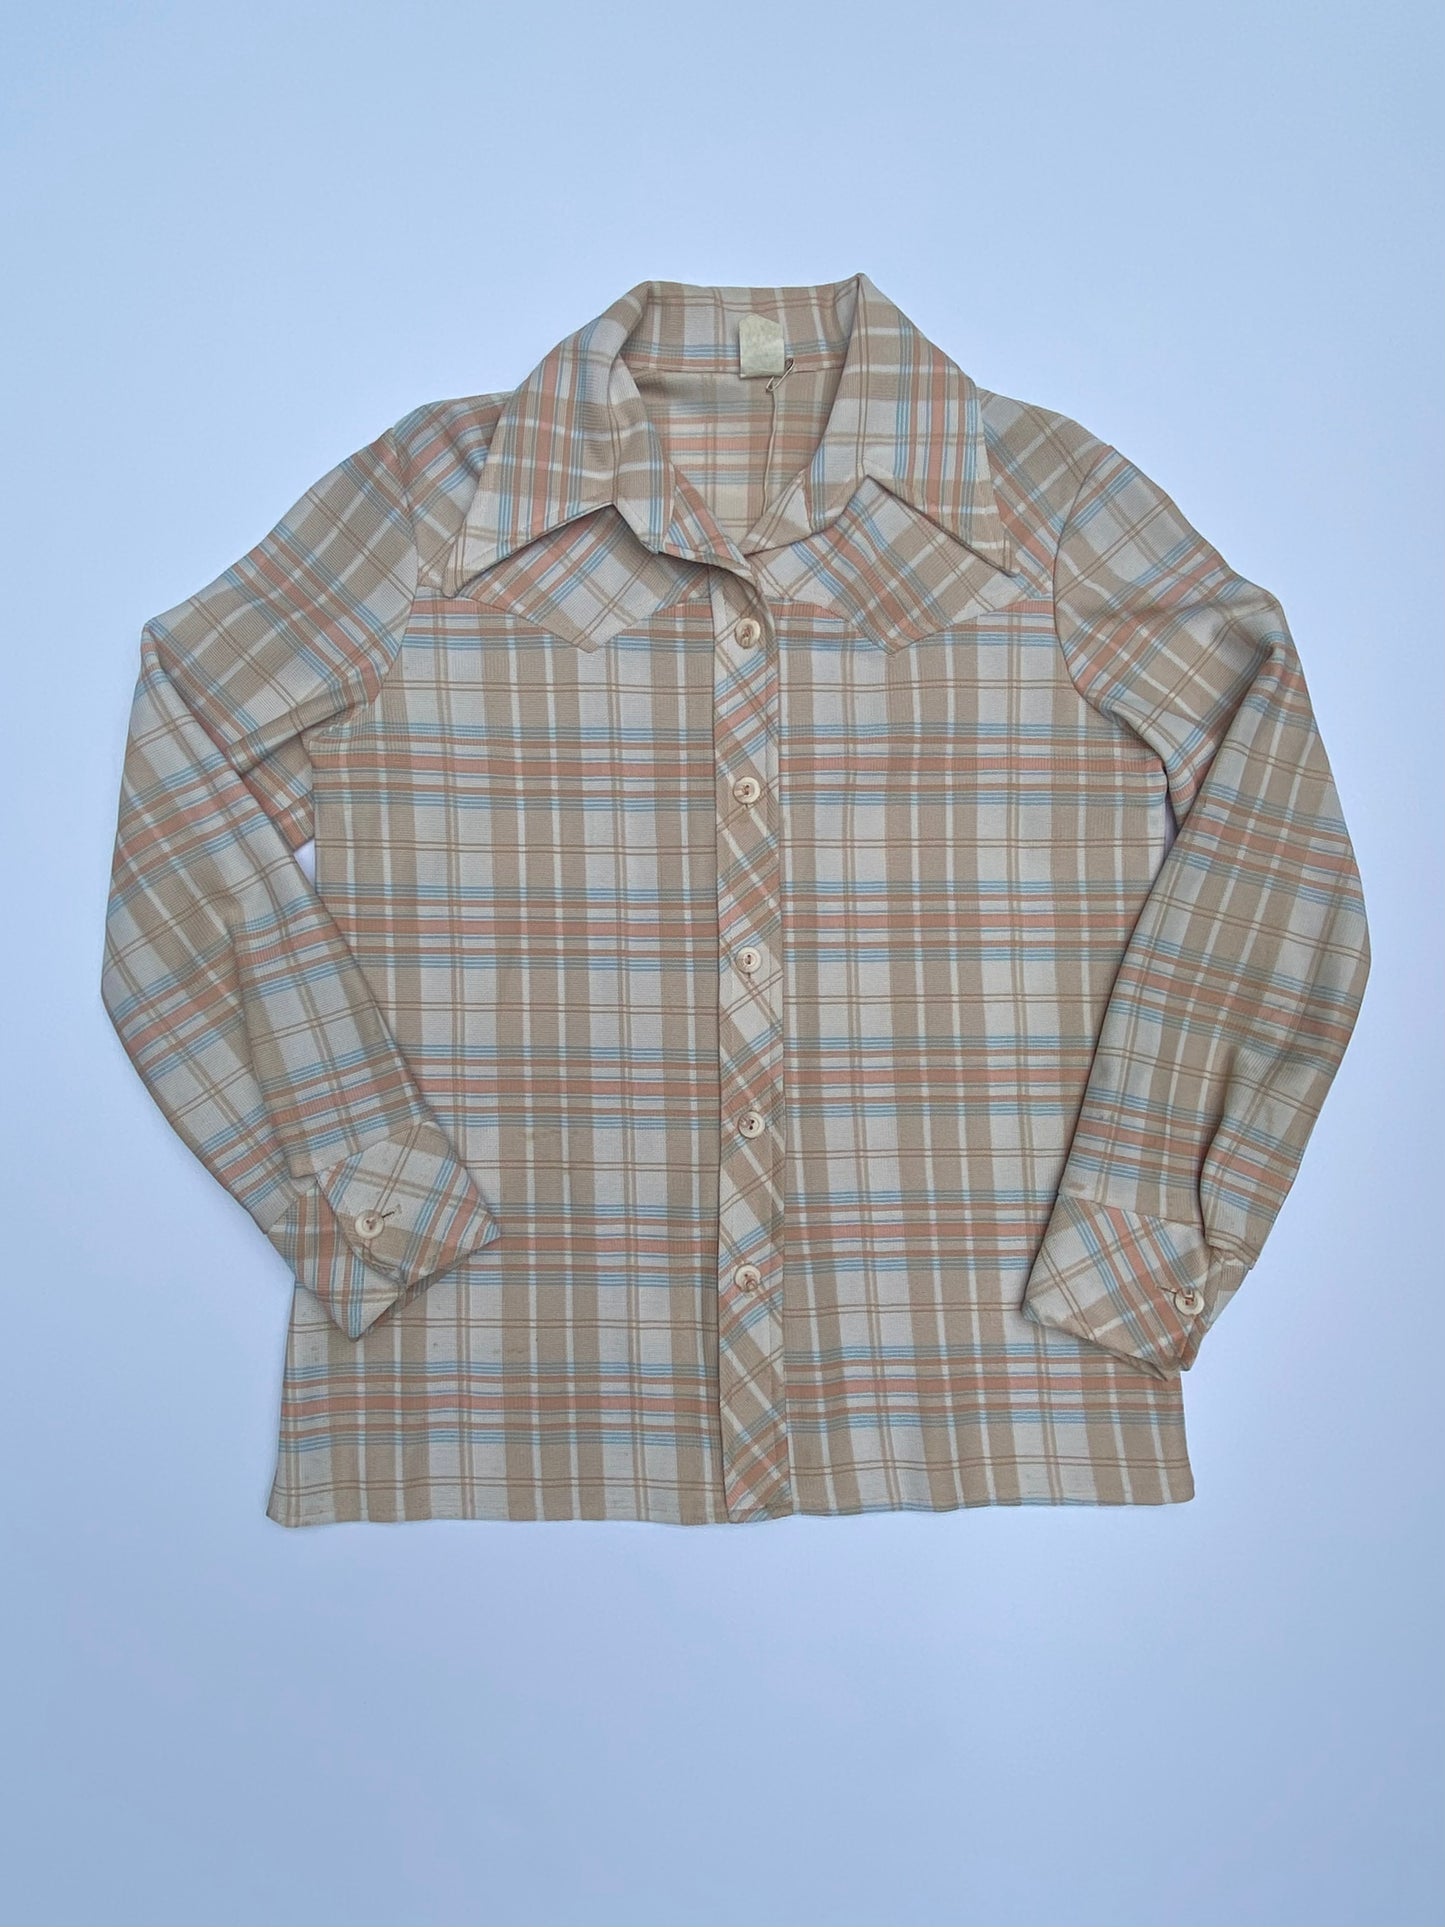 1970s Thick Button-Up Shirt (M)